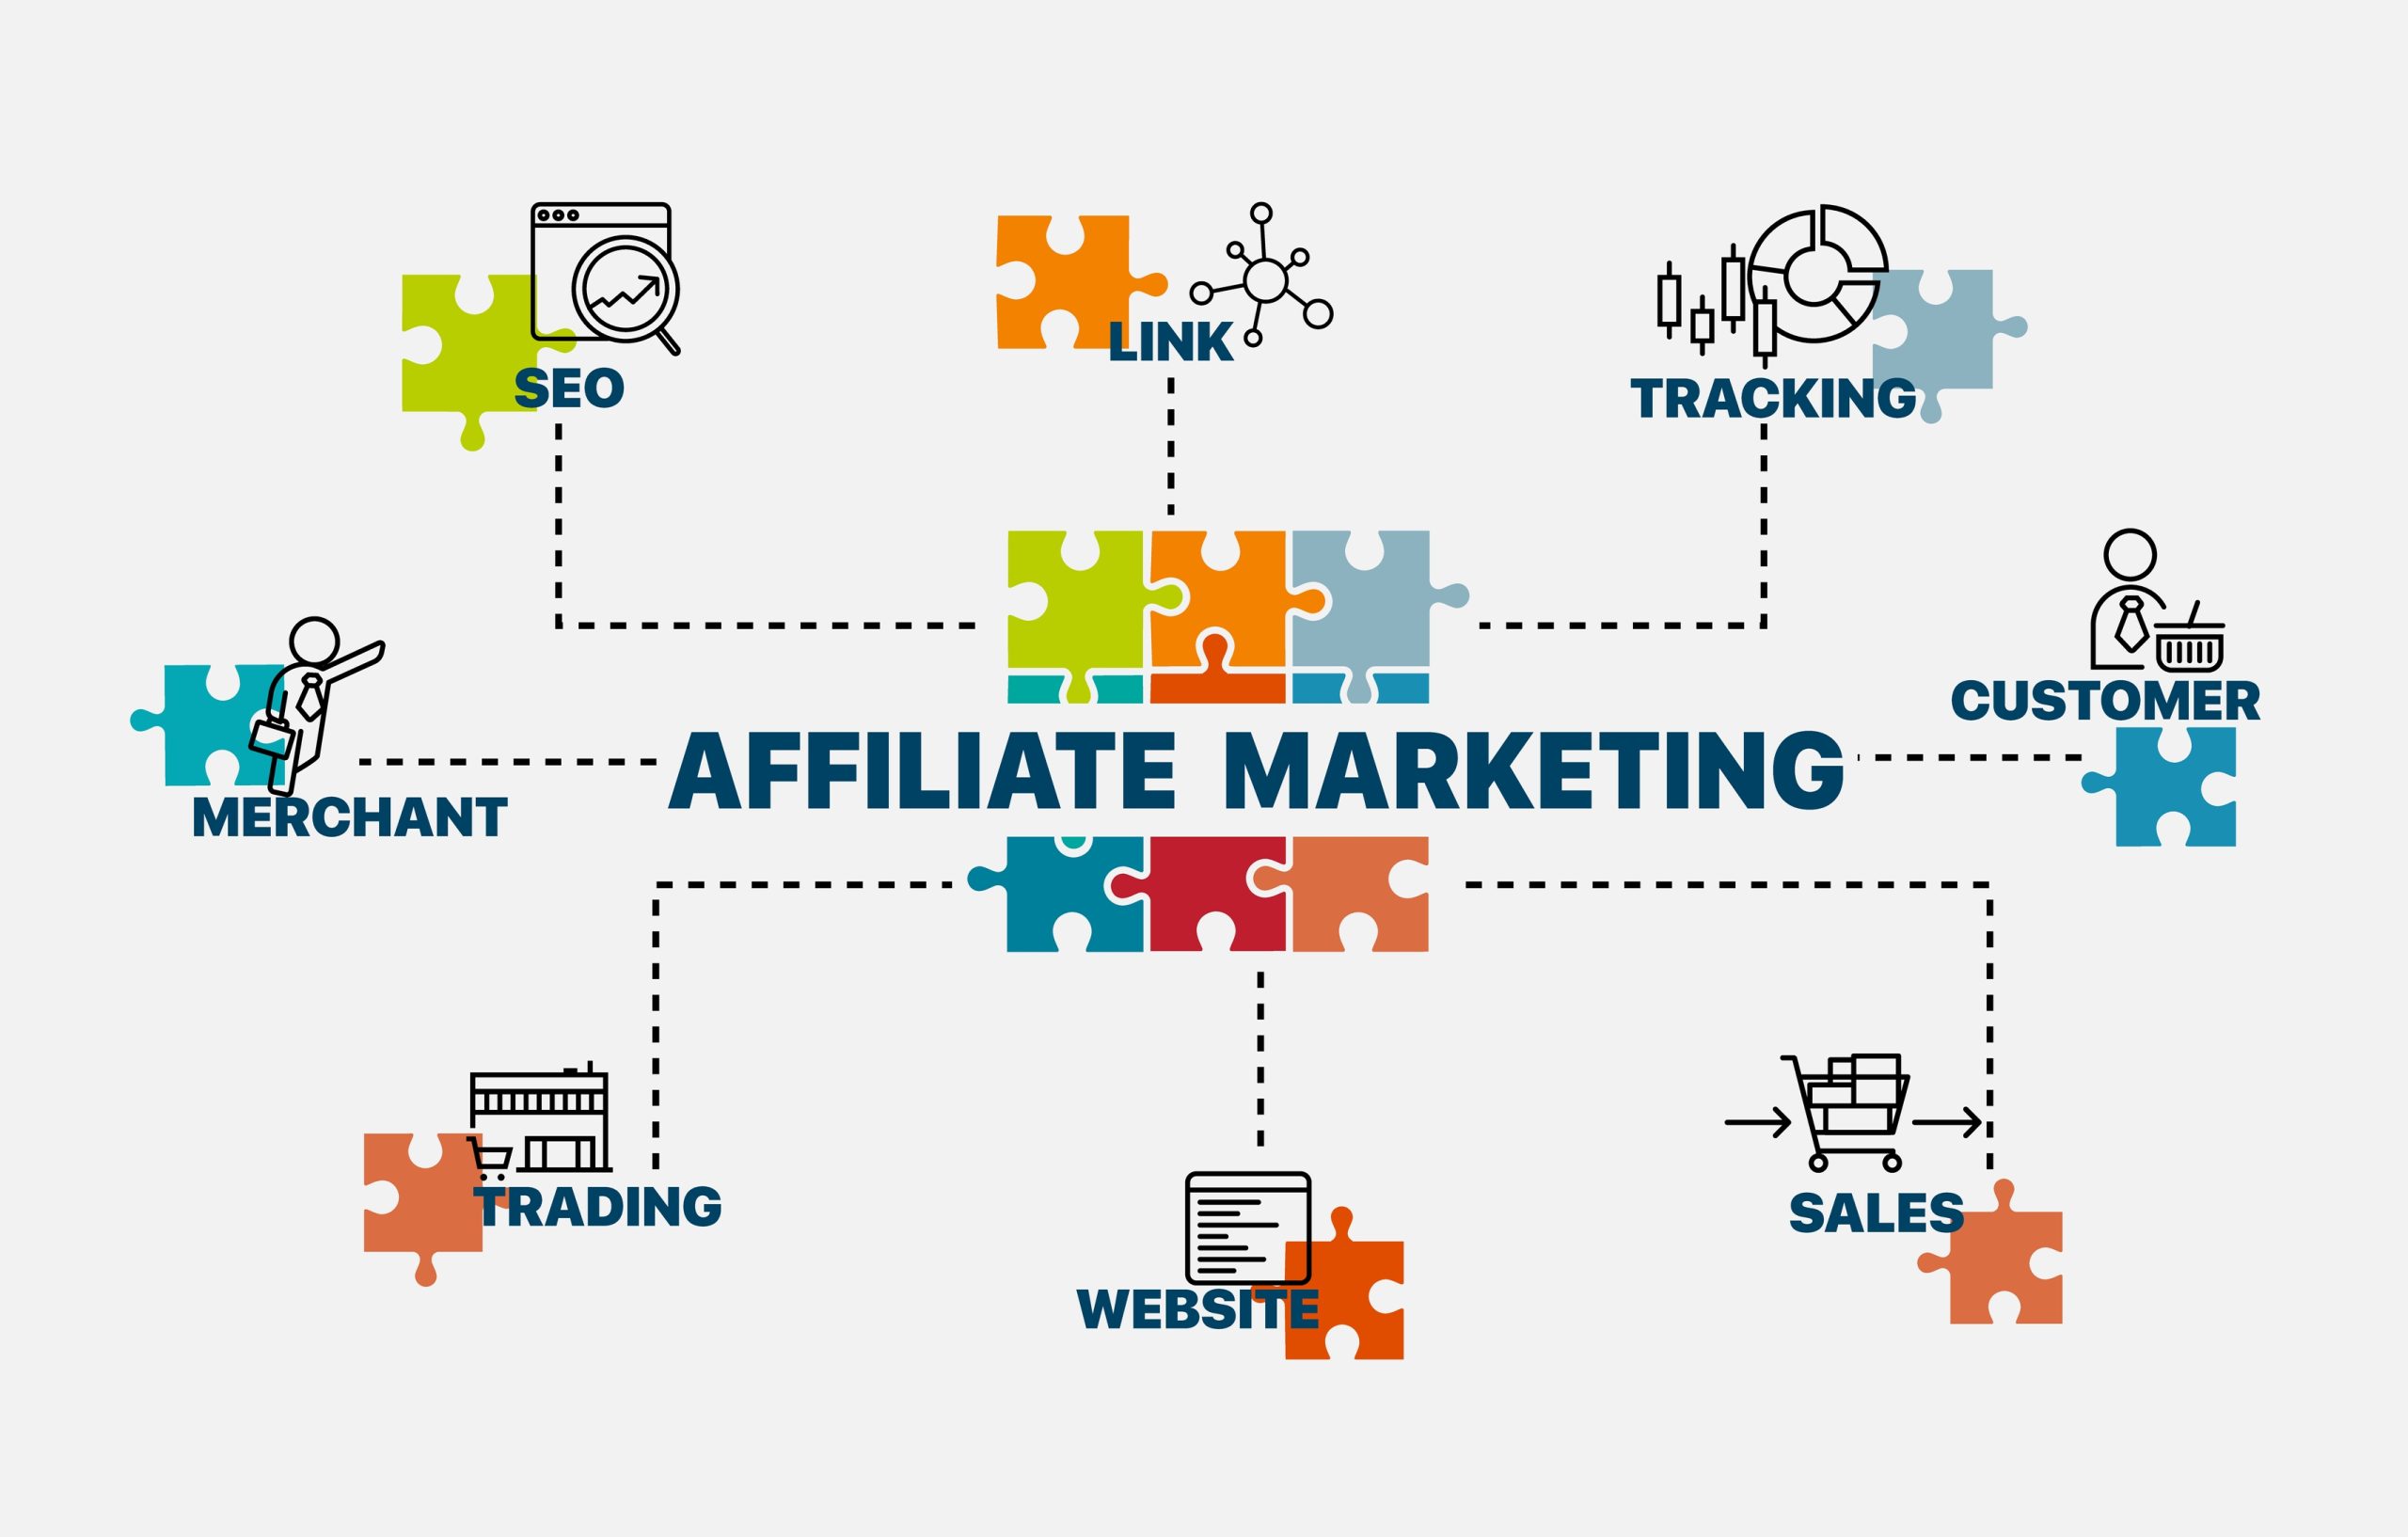 Image Free Software for Affiliate Marketing To Supercharge Your Campaigns